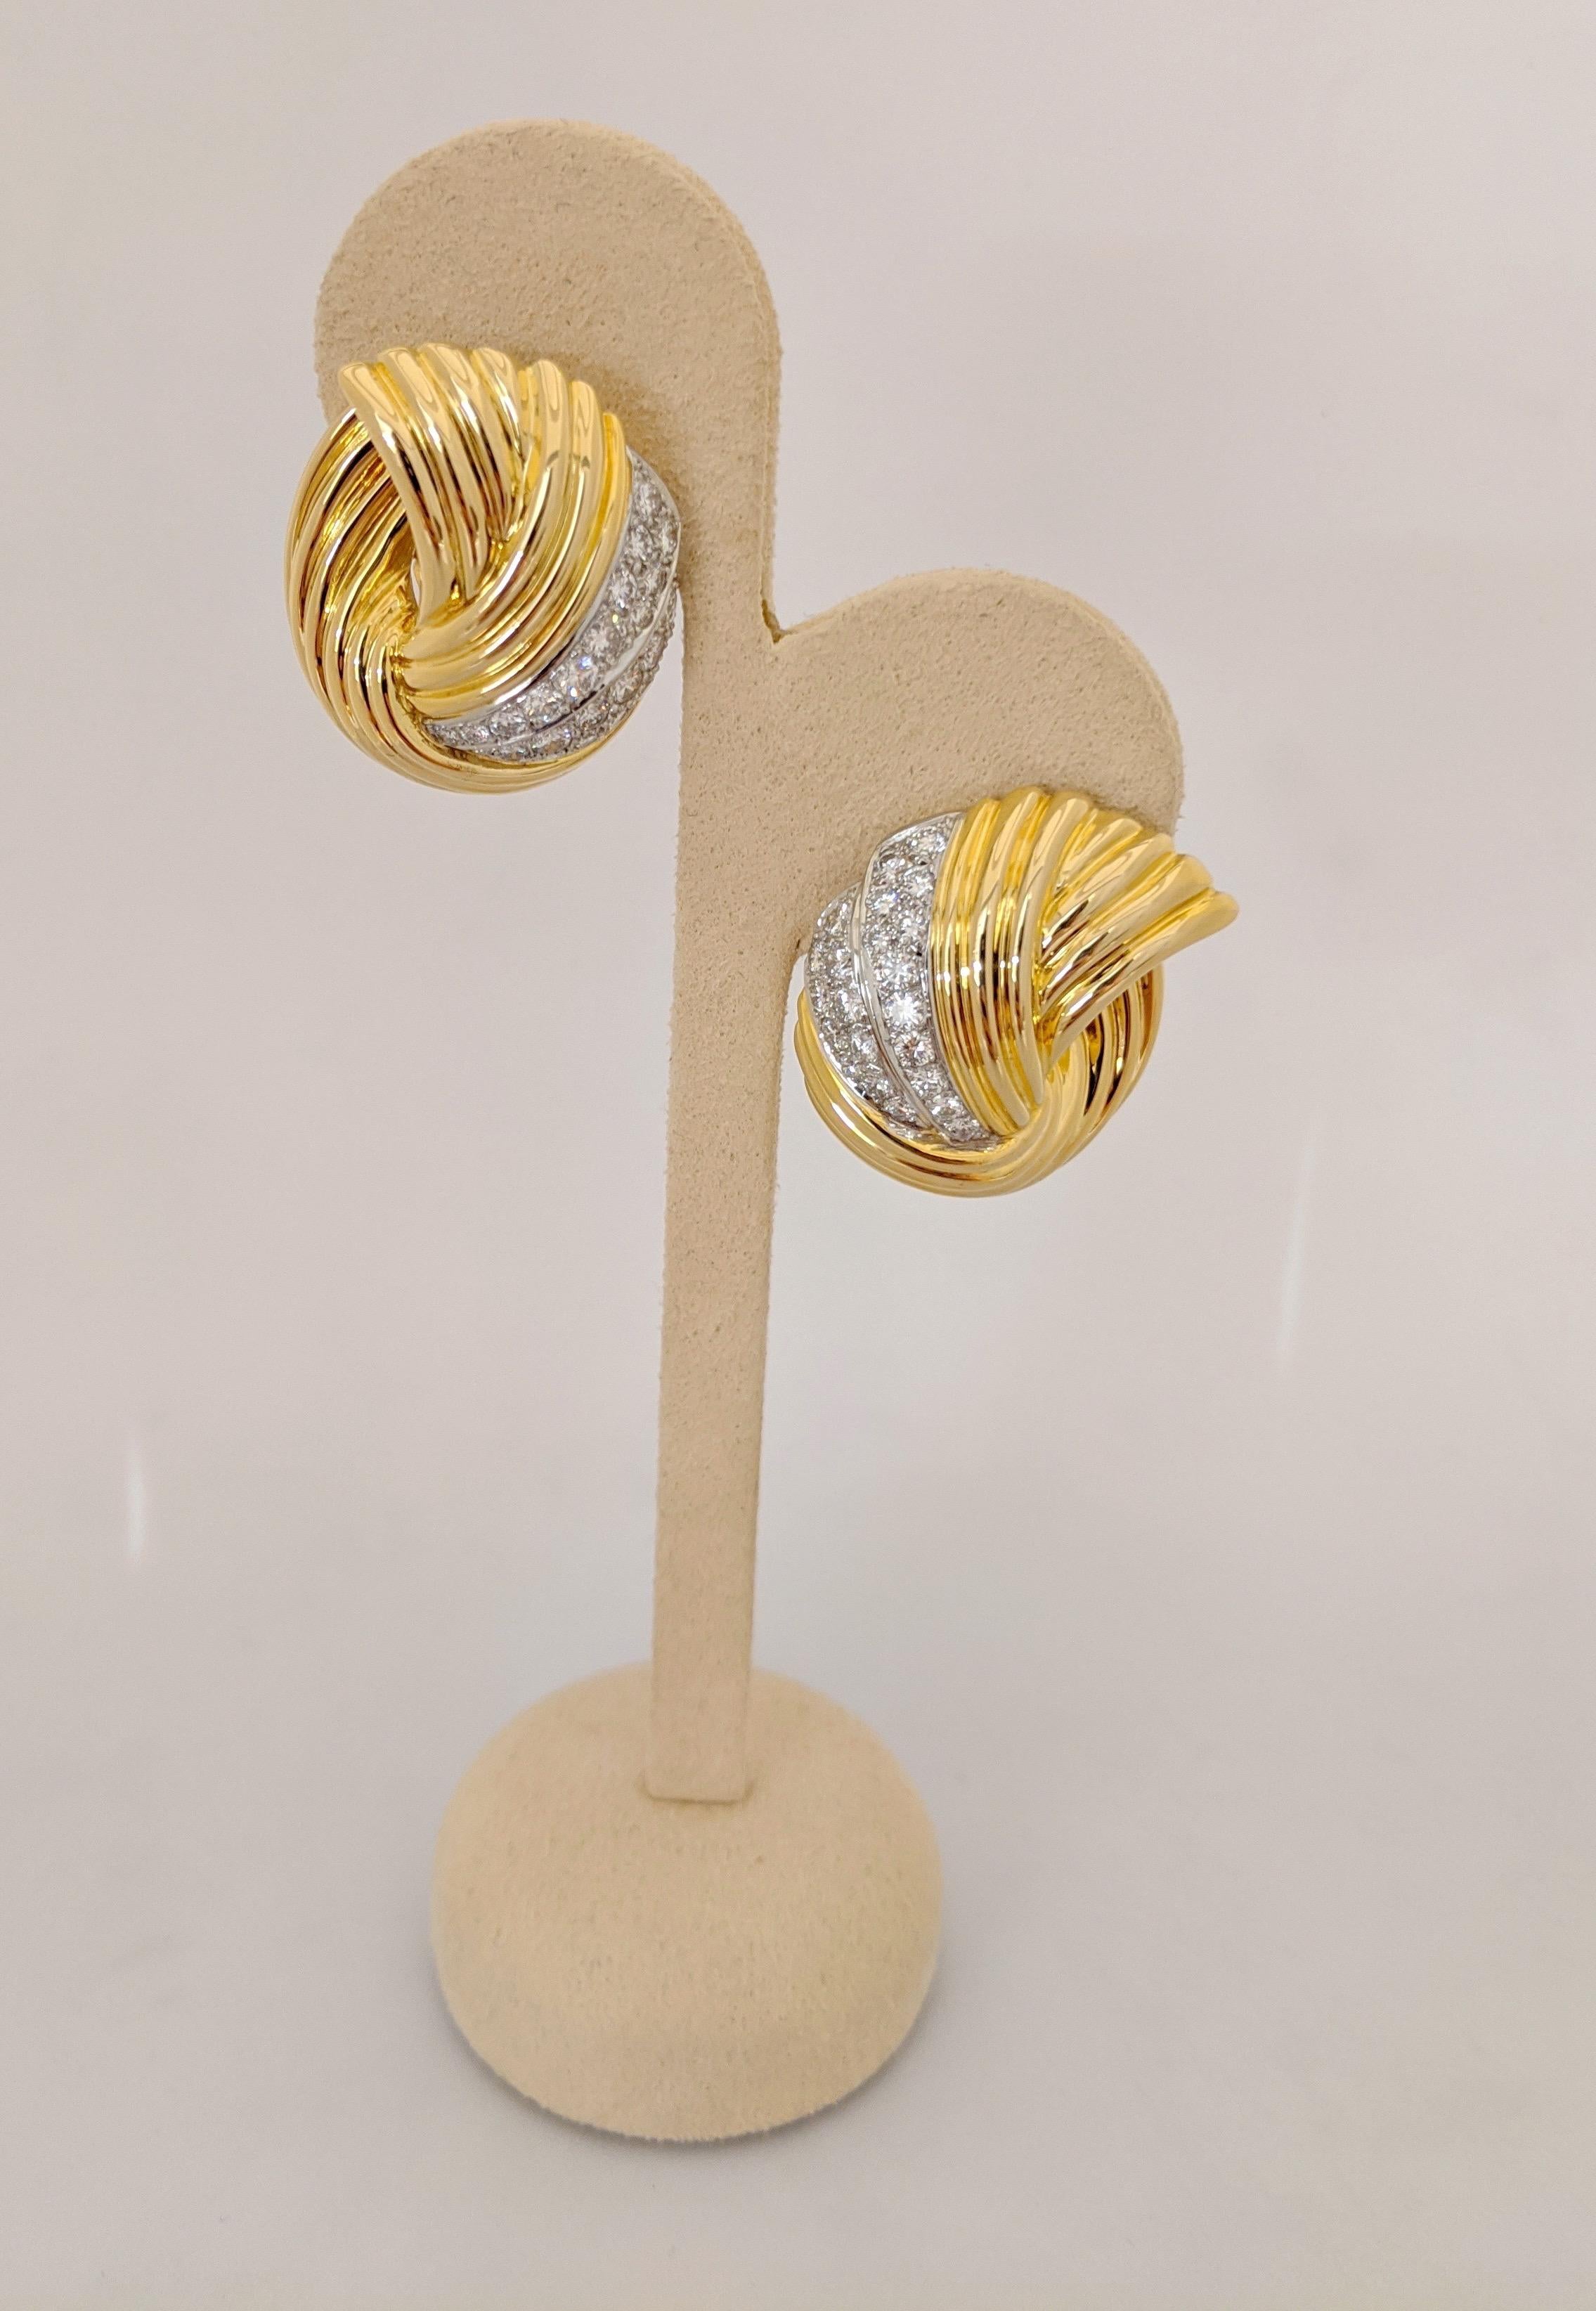 Cellini exclusive 18 karat gold and Diamond earrings. The earrings are designed with a swirl pattern in yellow gold. Each earring has 2 white gold sections that have been set with round Brilliant Cut Diamonds. The earrings measure 1' long x 3/4